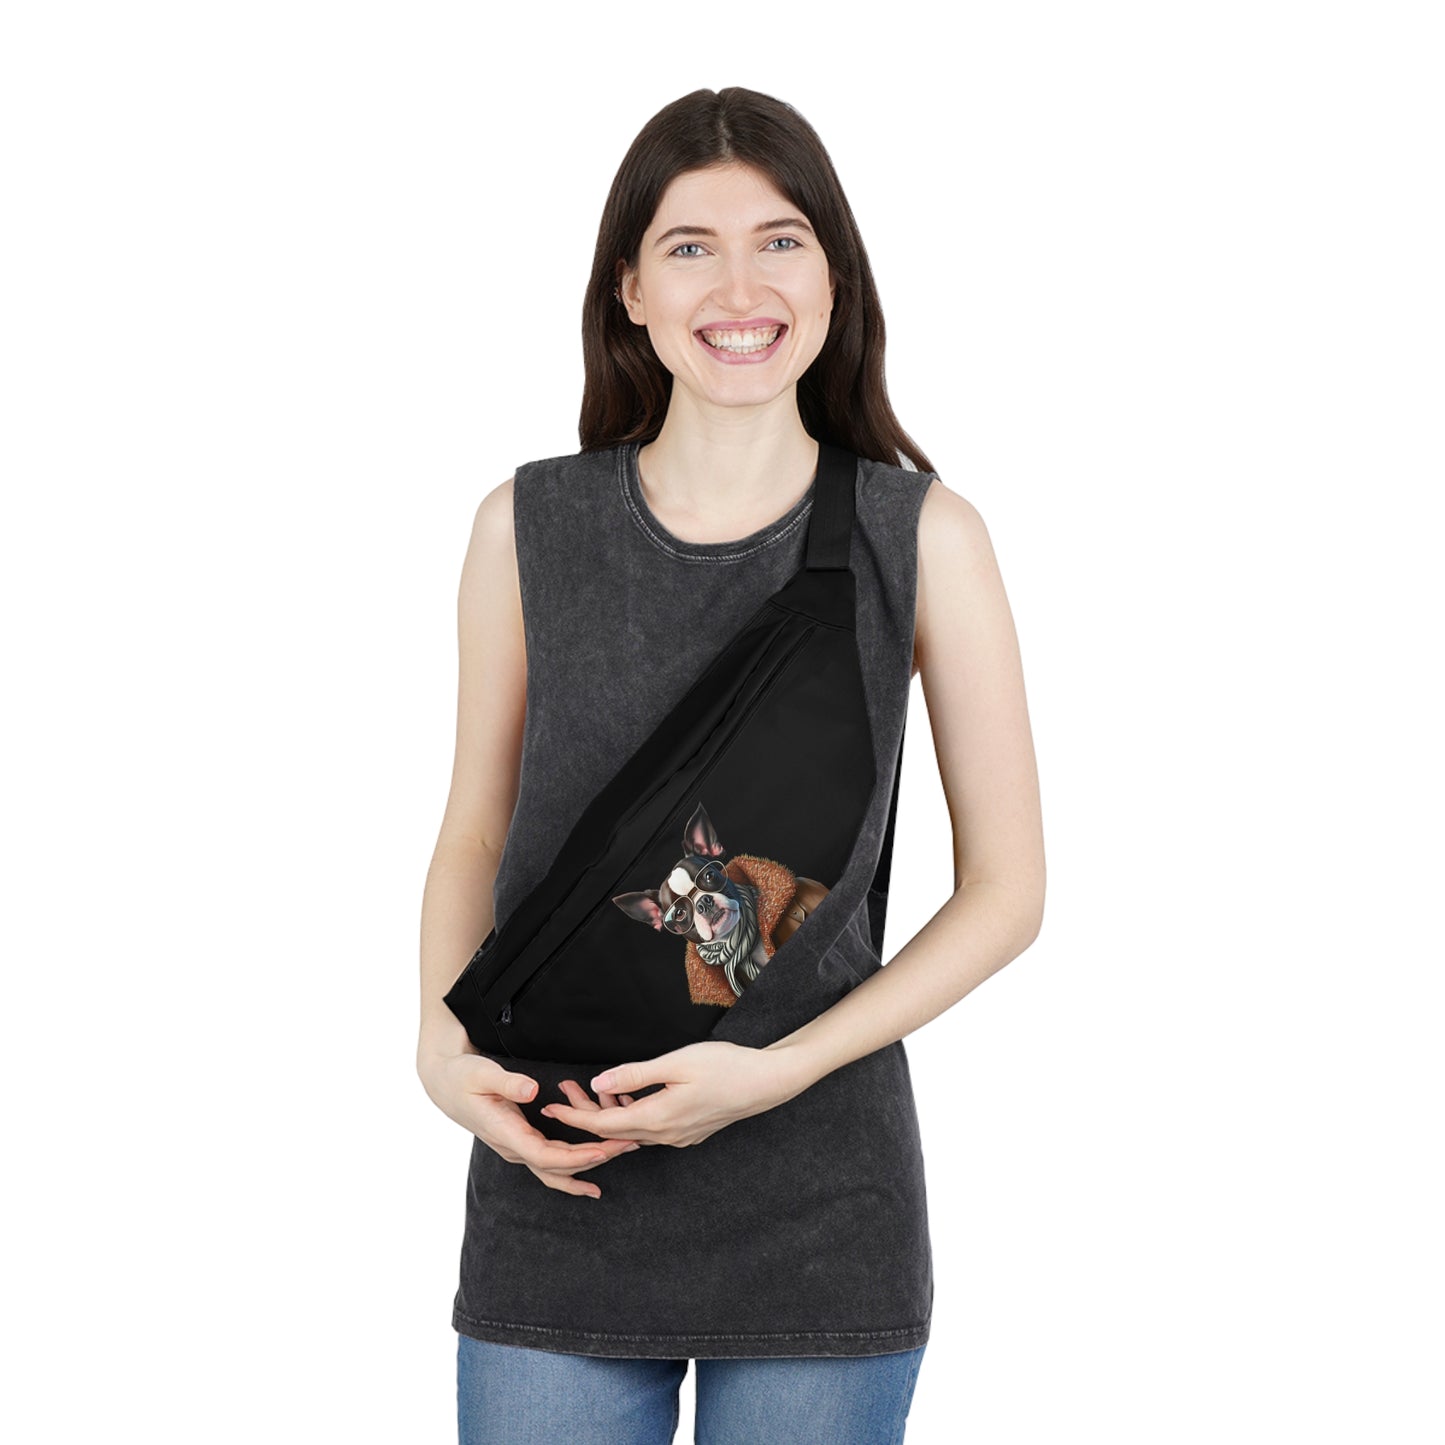 BENNY Large Stylish Fanny Pack | Hands-Free Accessory